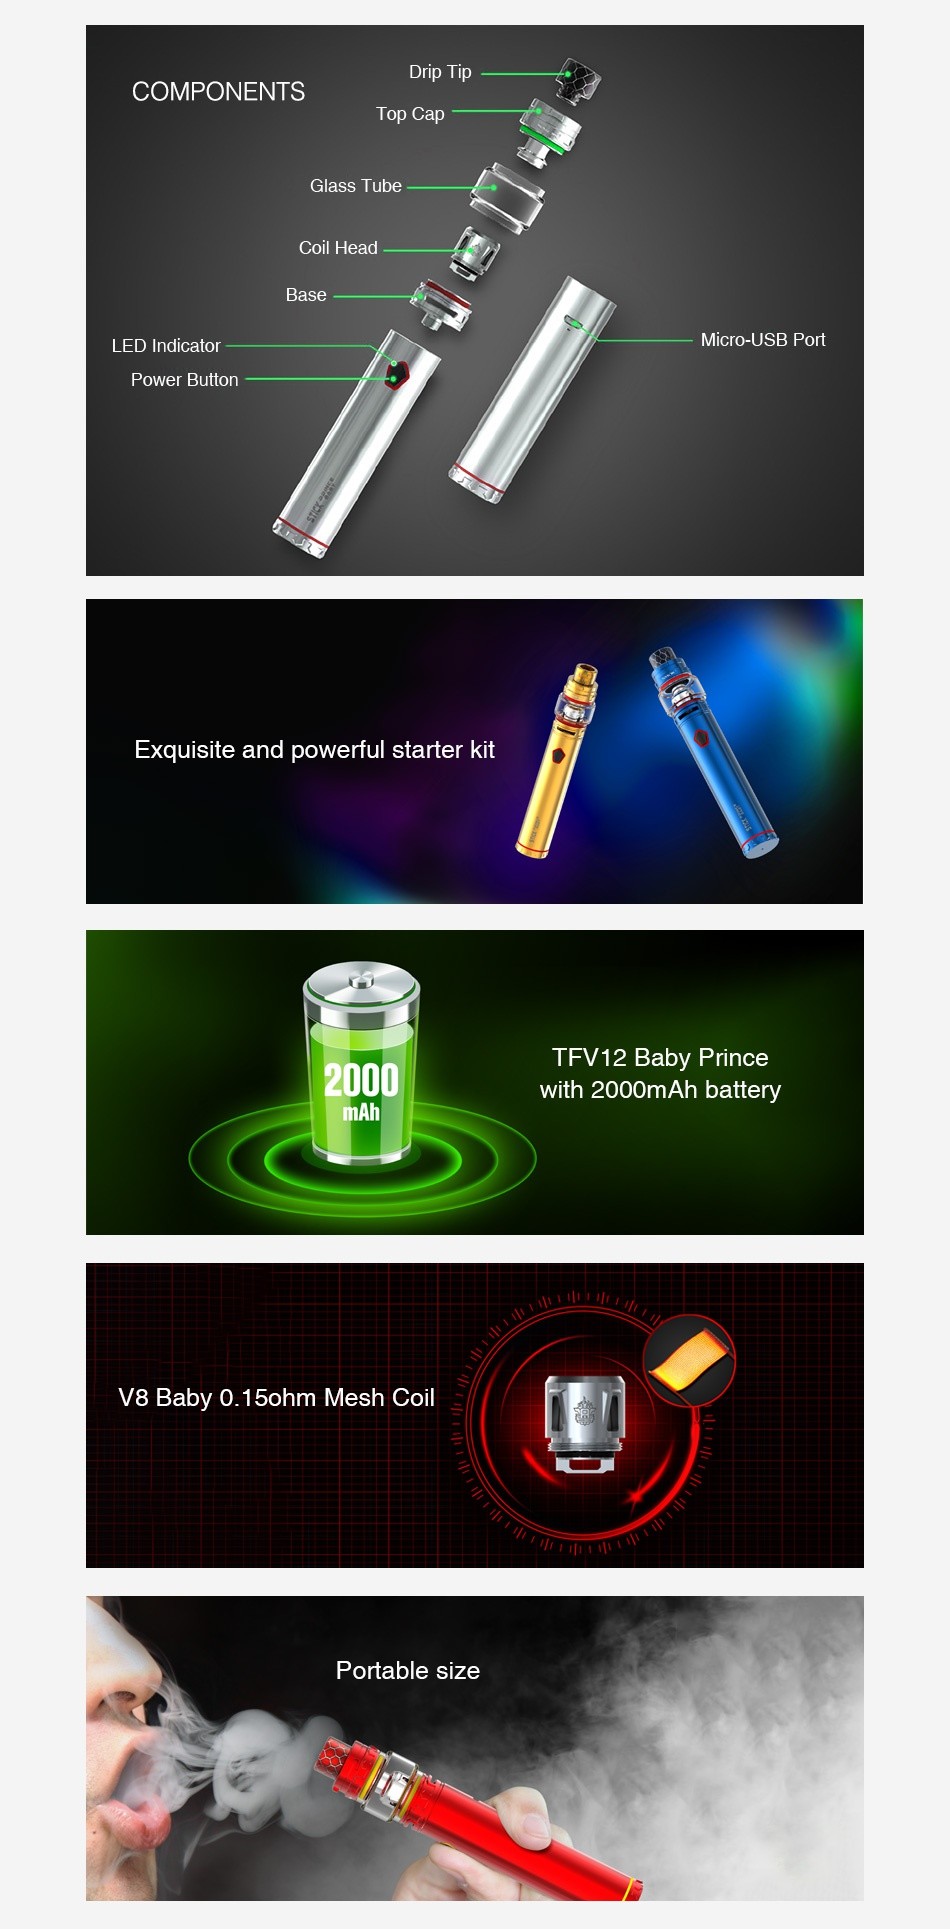 SMOK Stick Prince Baby Starter Kit 2000mAh Drip ti COMPONENTS Top Ca Glass Tube Coil head Base ED Indicator Power Button Exquisite and powerful starter kit TFV12 Baby Prince 2000 with 2000mAh battery 8 Baby 0  1 bohm Mesh coil Portable size